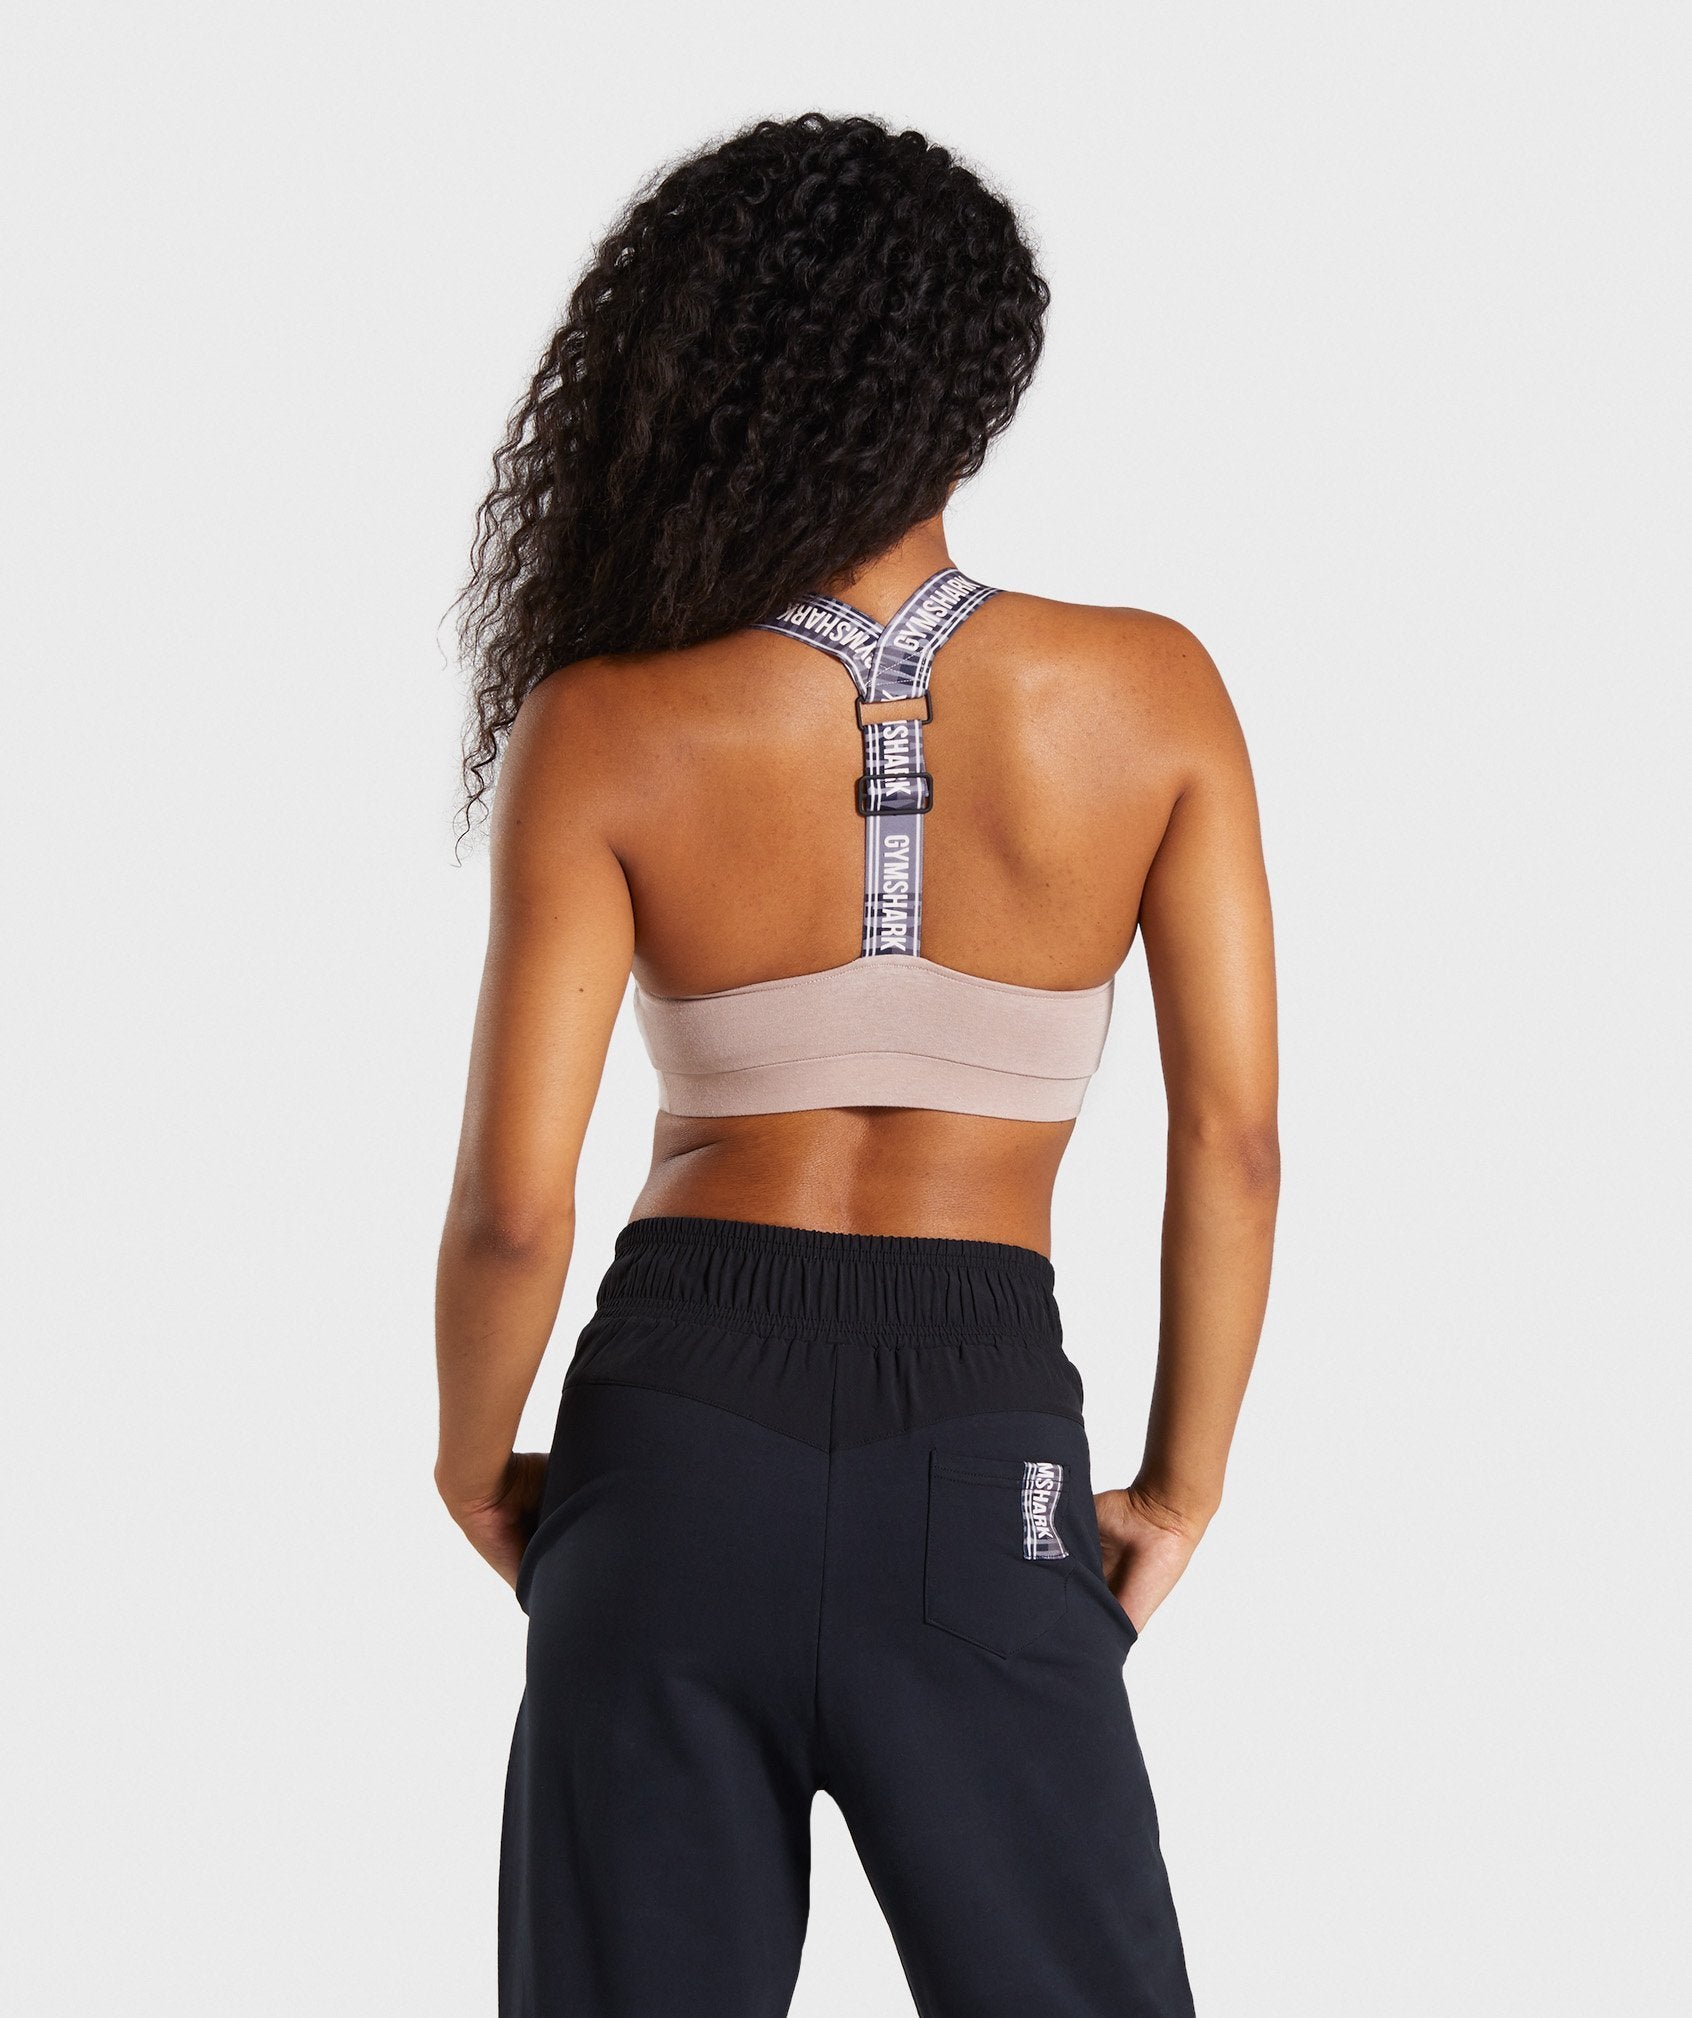 Revival Sports Bra product image 2